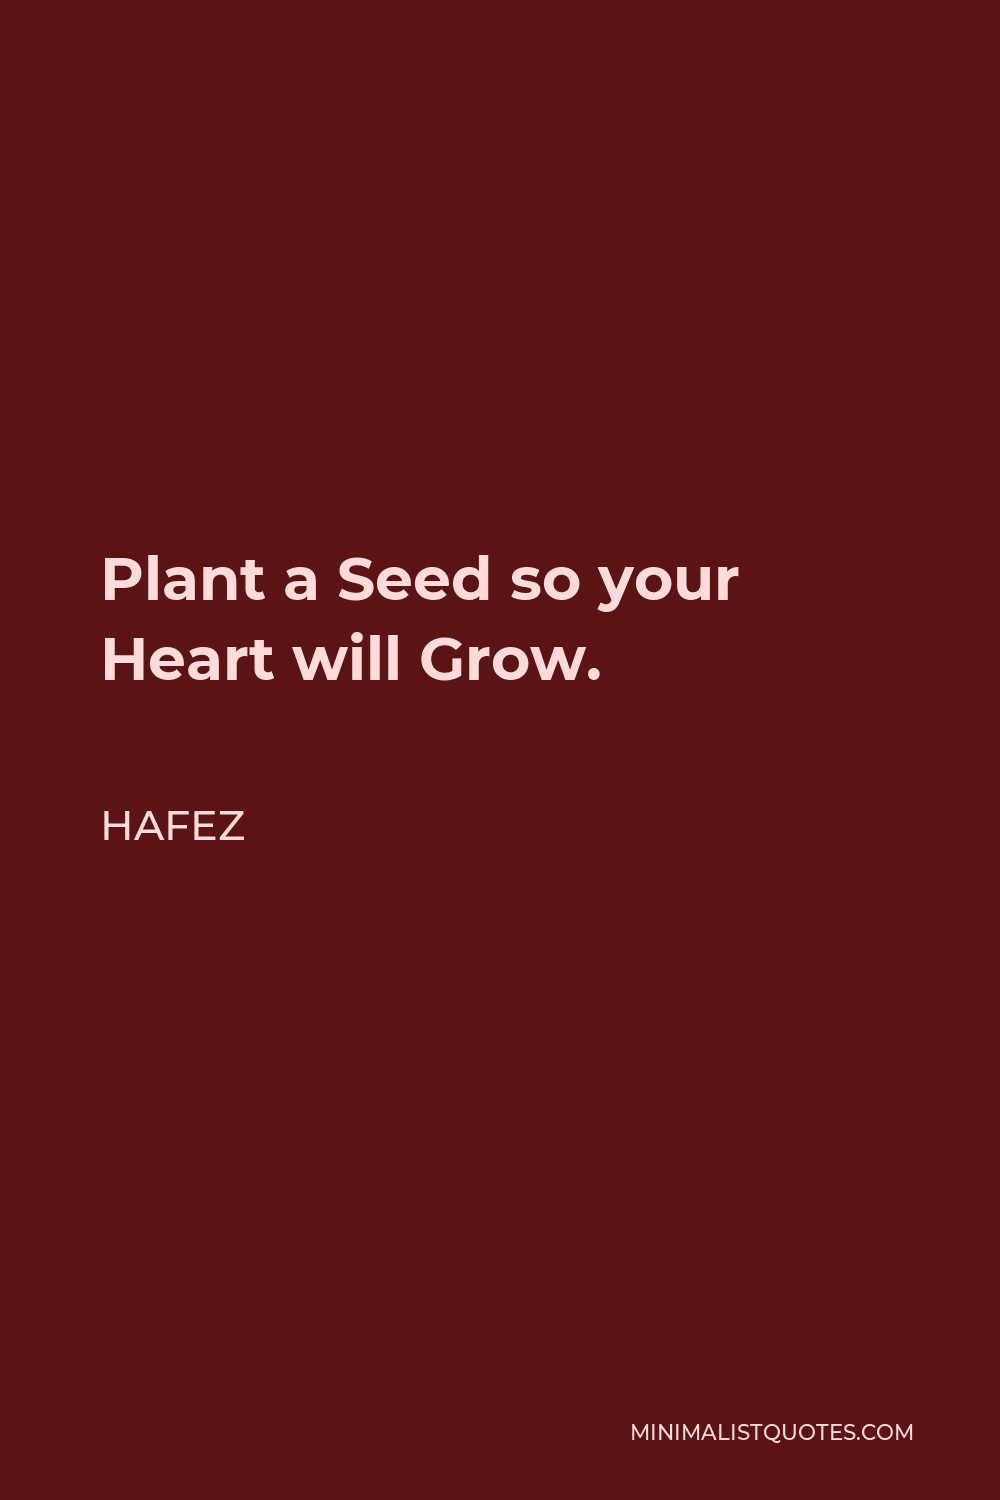 Hafez Quote - Plant a Seed so your Heart will Grow.